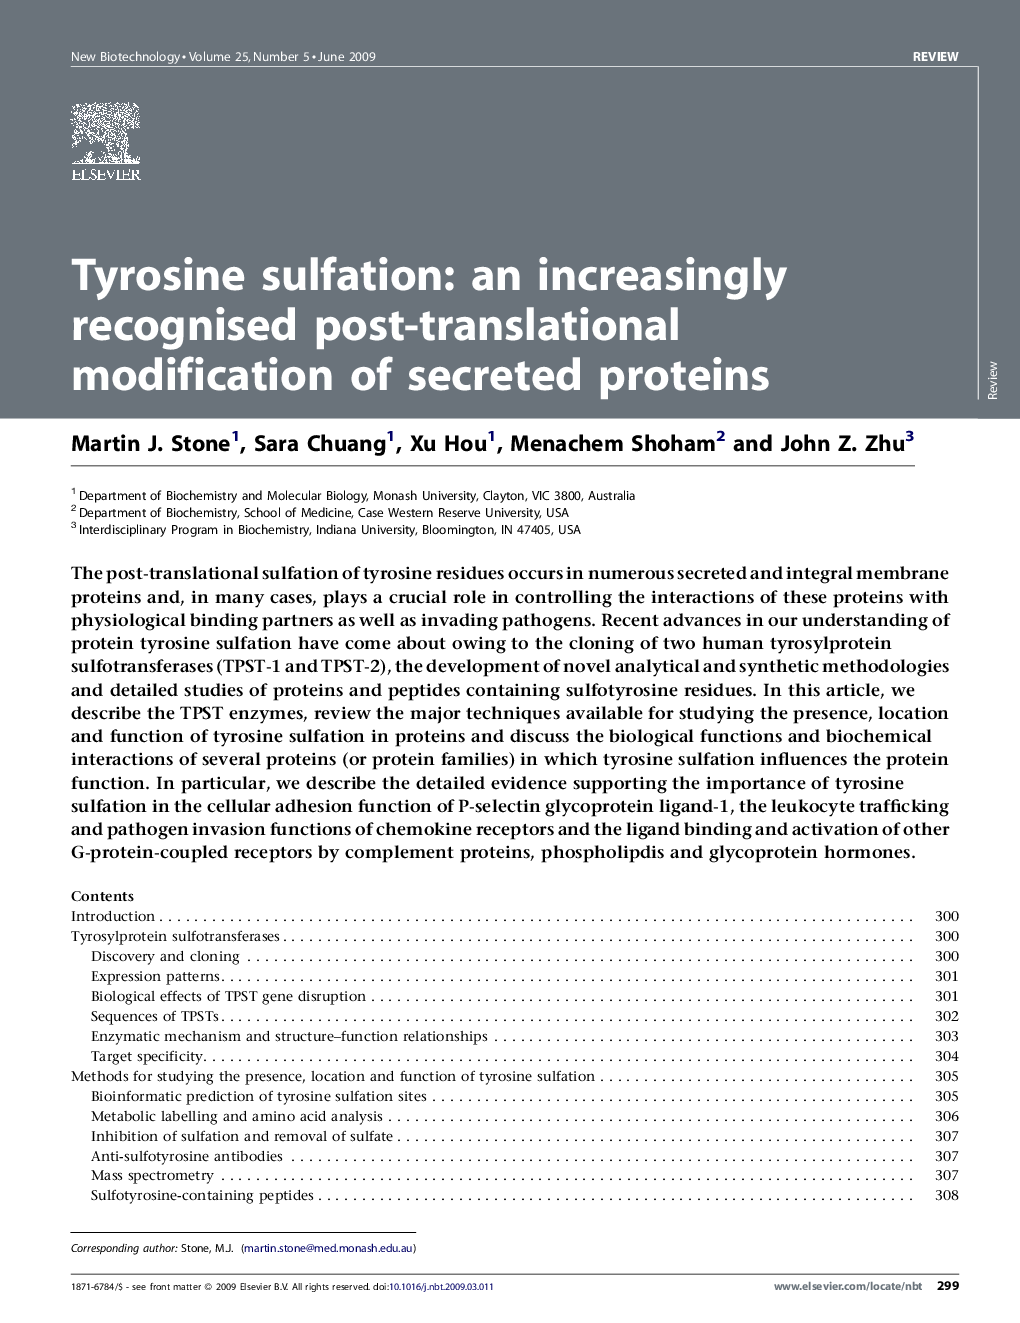 Tyrosine sulfation: an increasingly recognised post-translational modification of secreted proteins